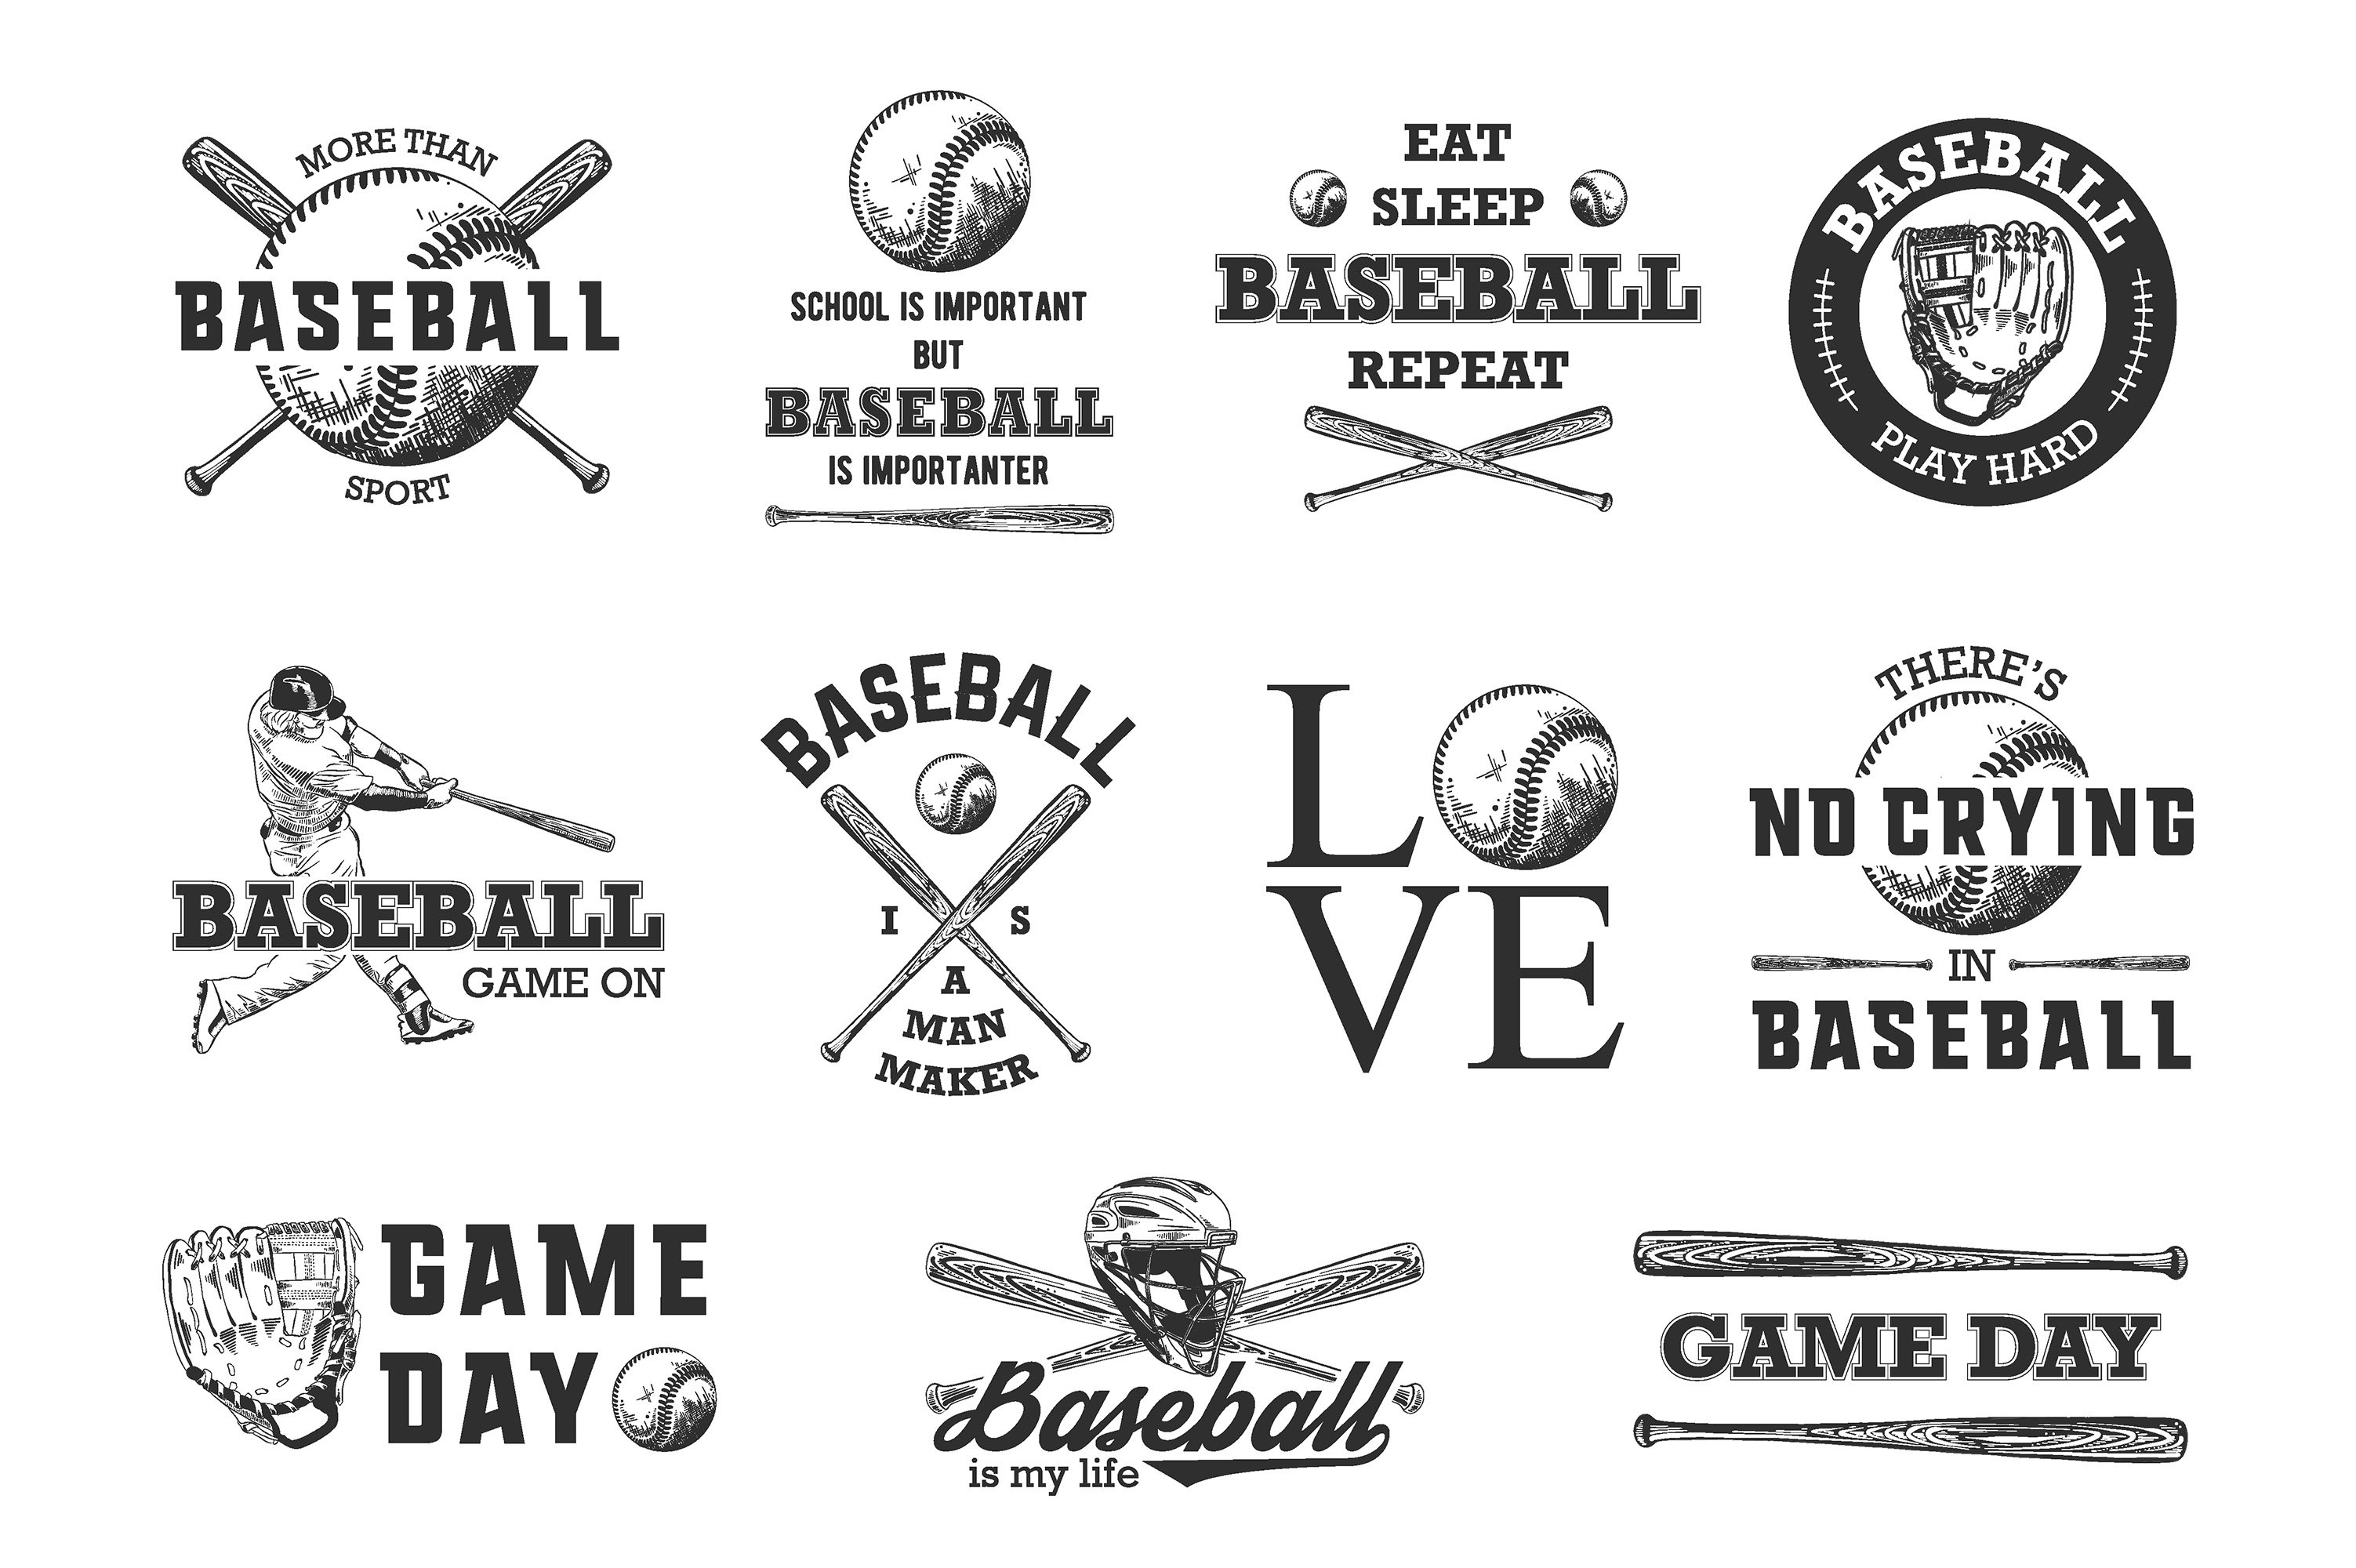 A collection of baseball logos and emblems.